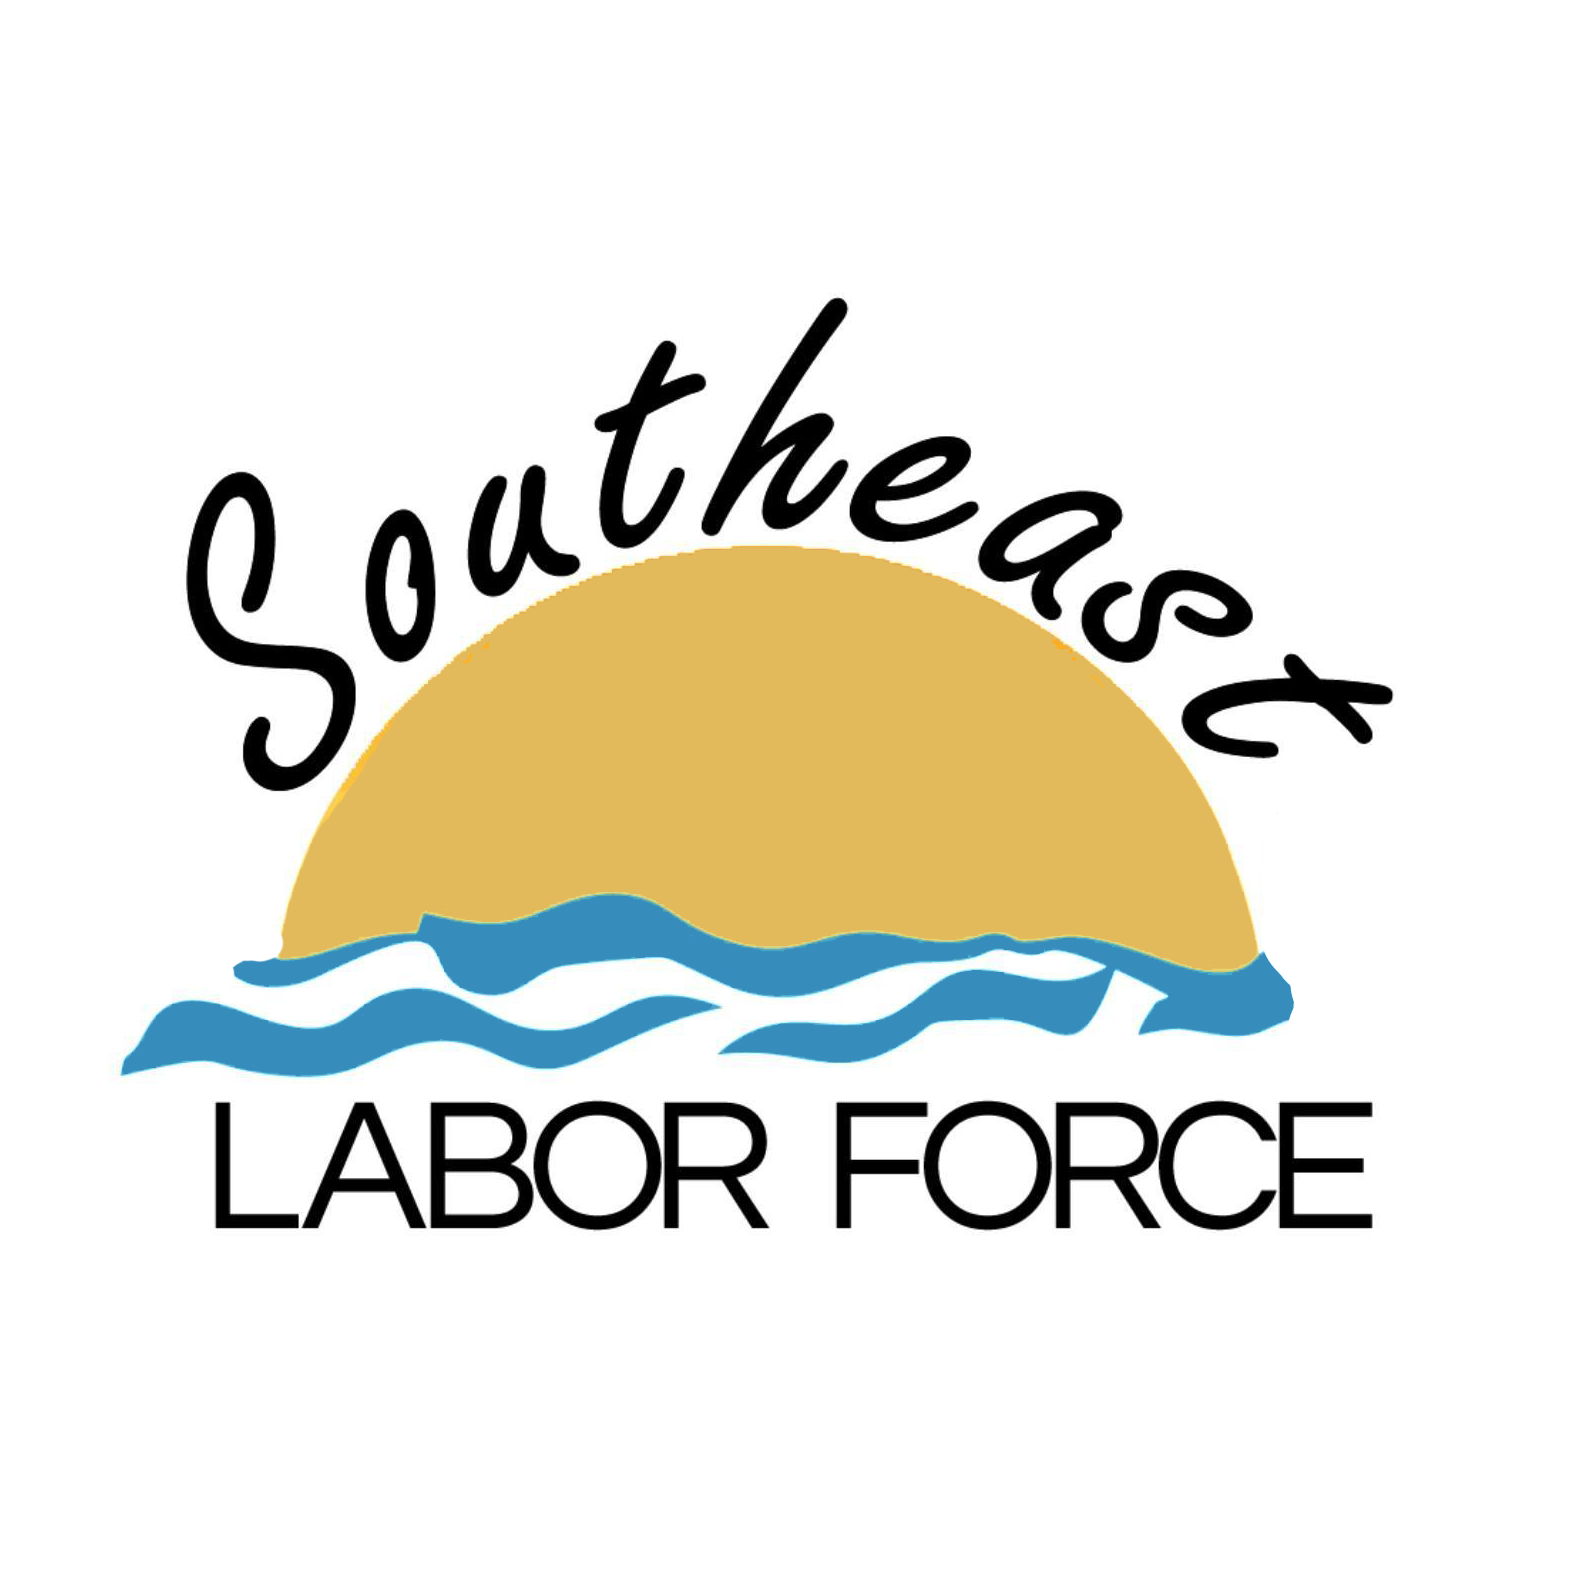 Southeast COntracting Service Logo